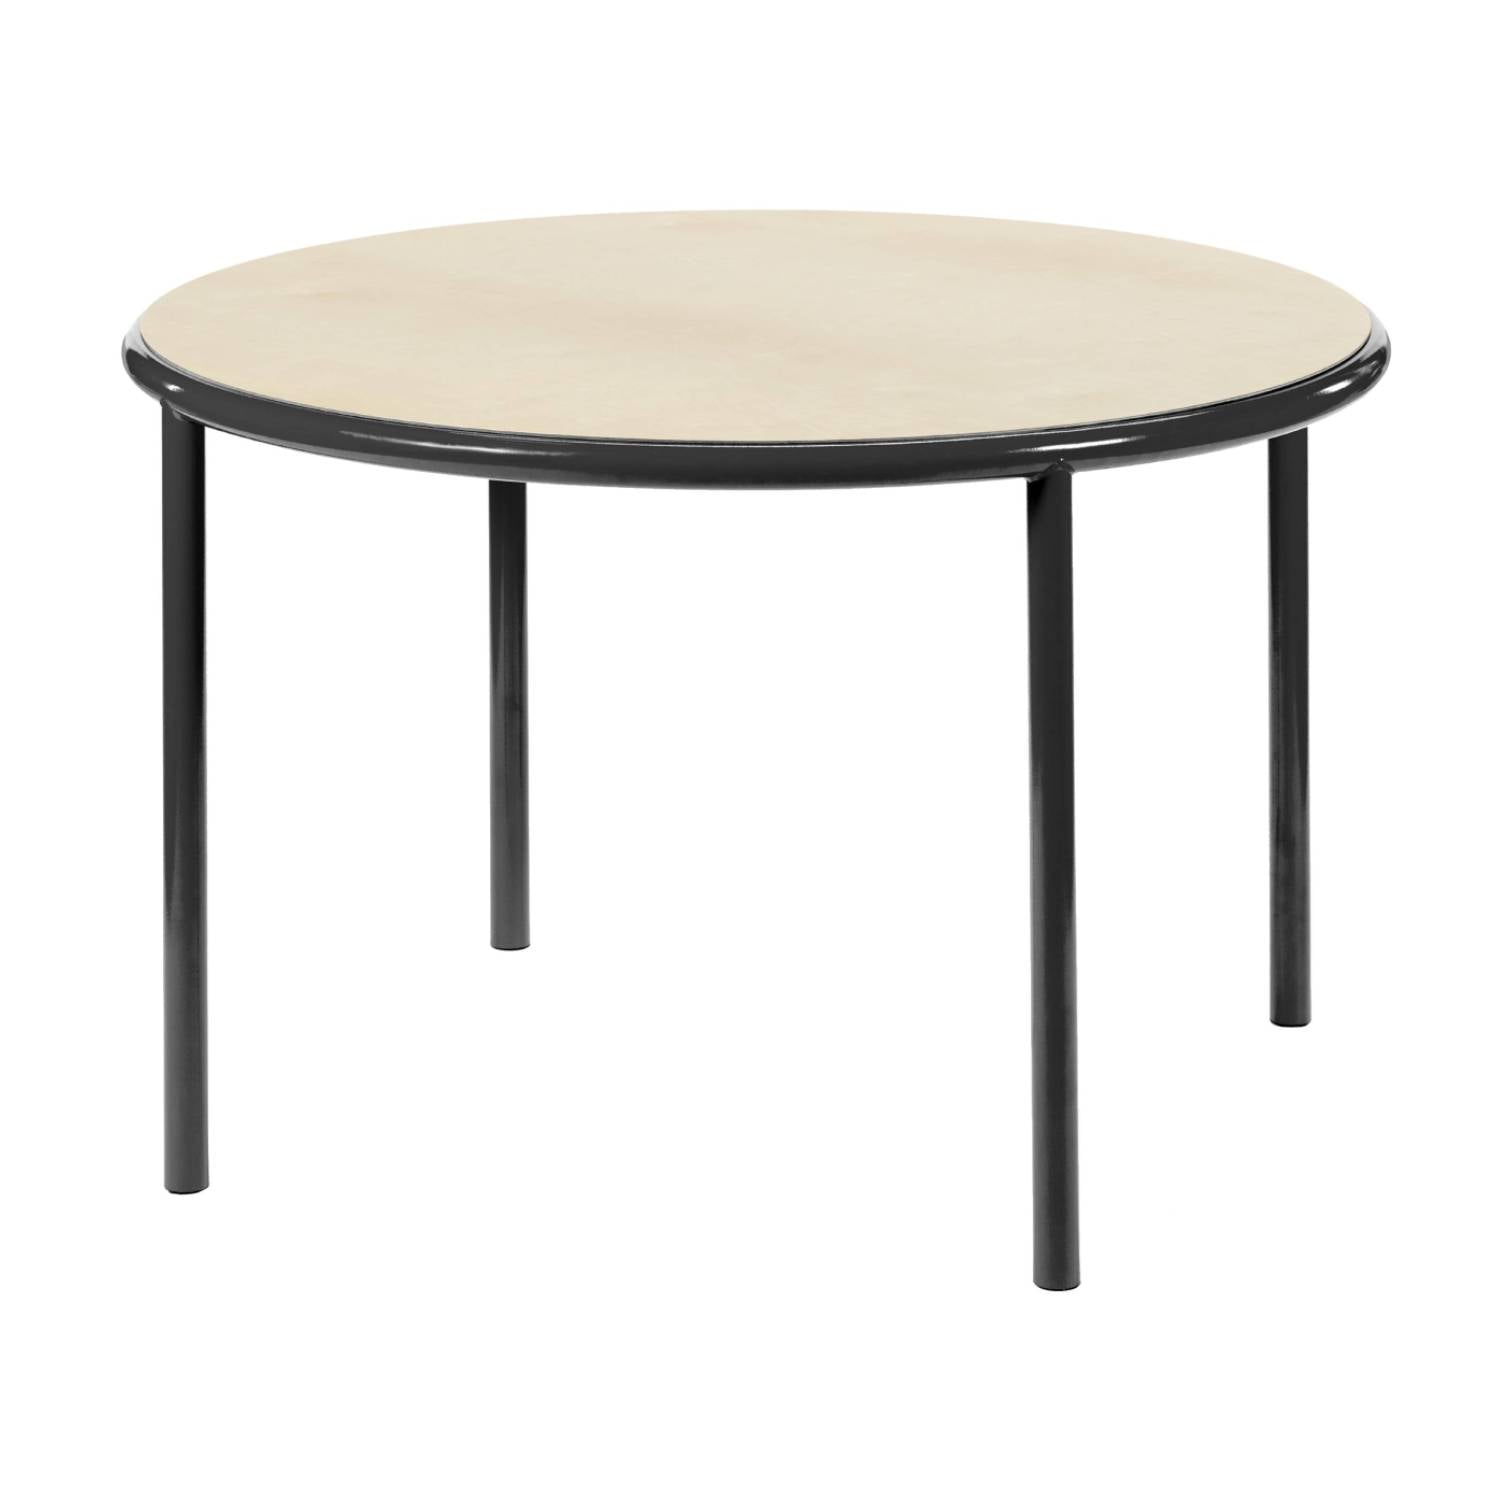 Wooden Table Round: Large - 59.1